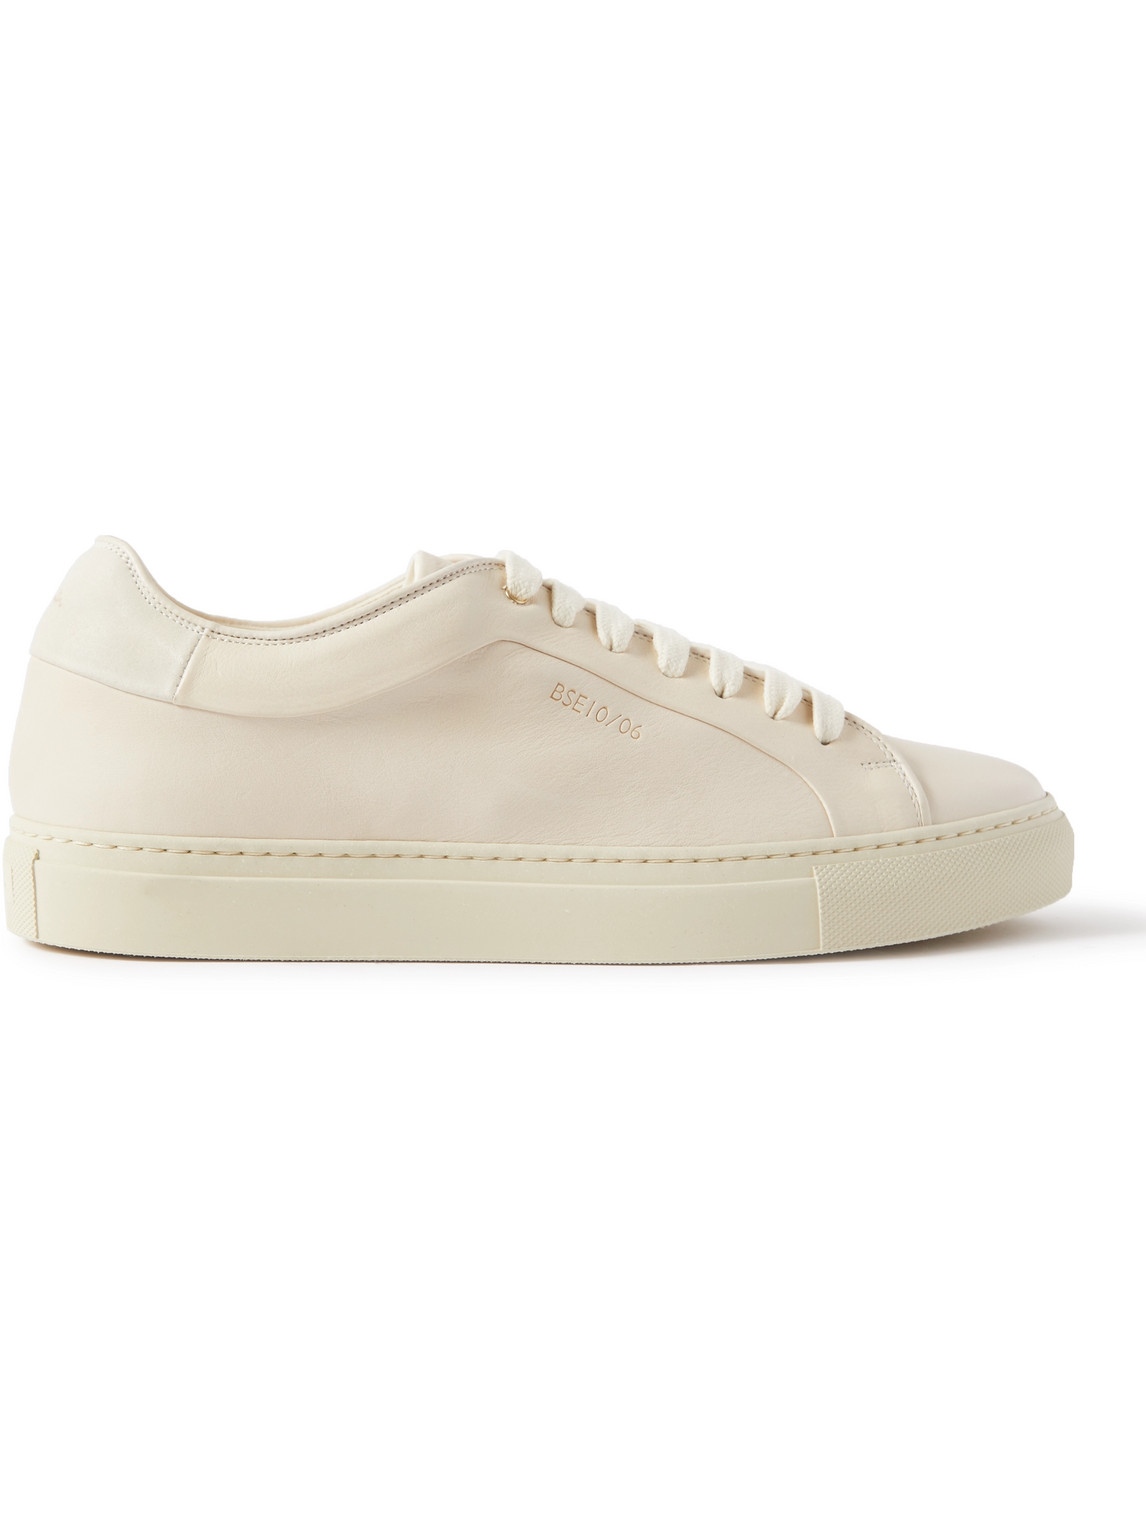 PAUL SMITH BASSO ECO LEATHER SNEAKERS